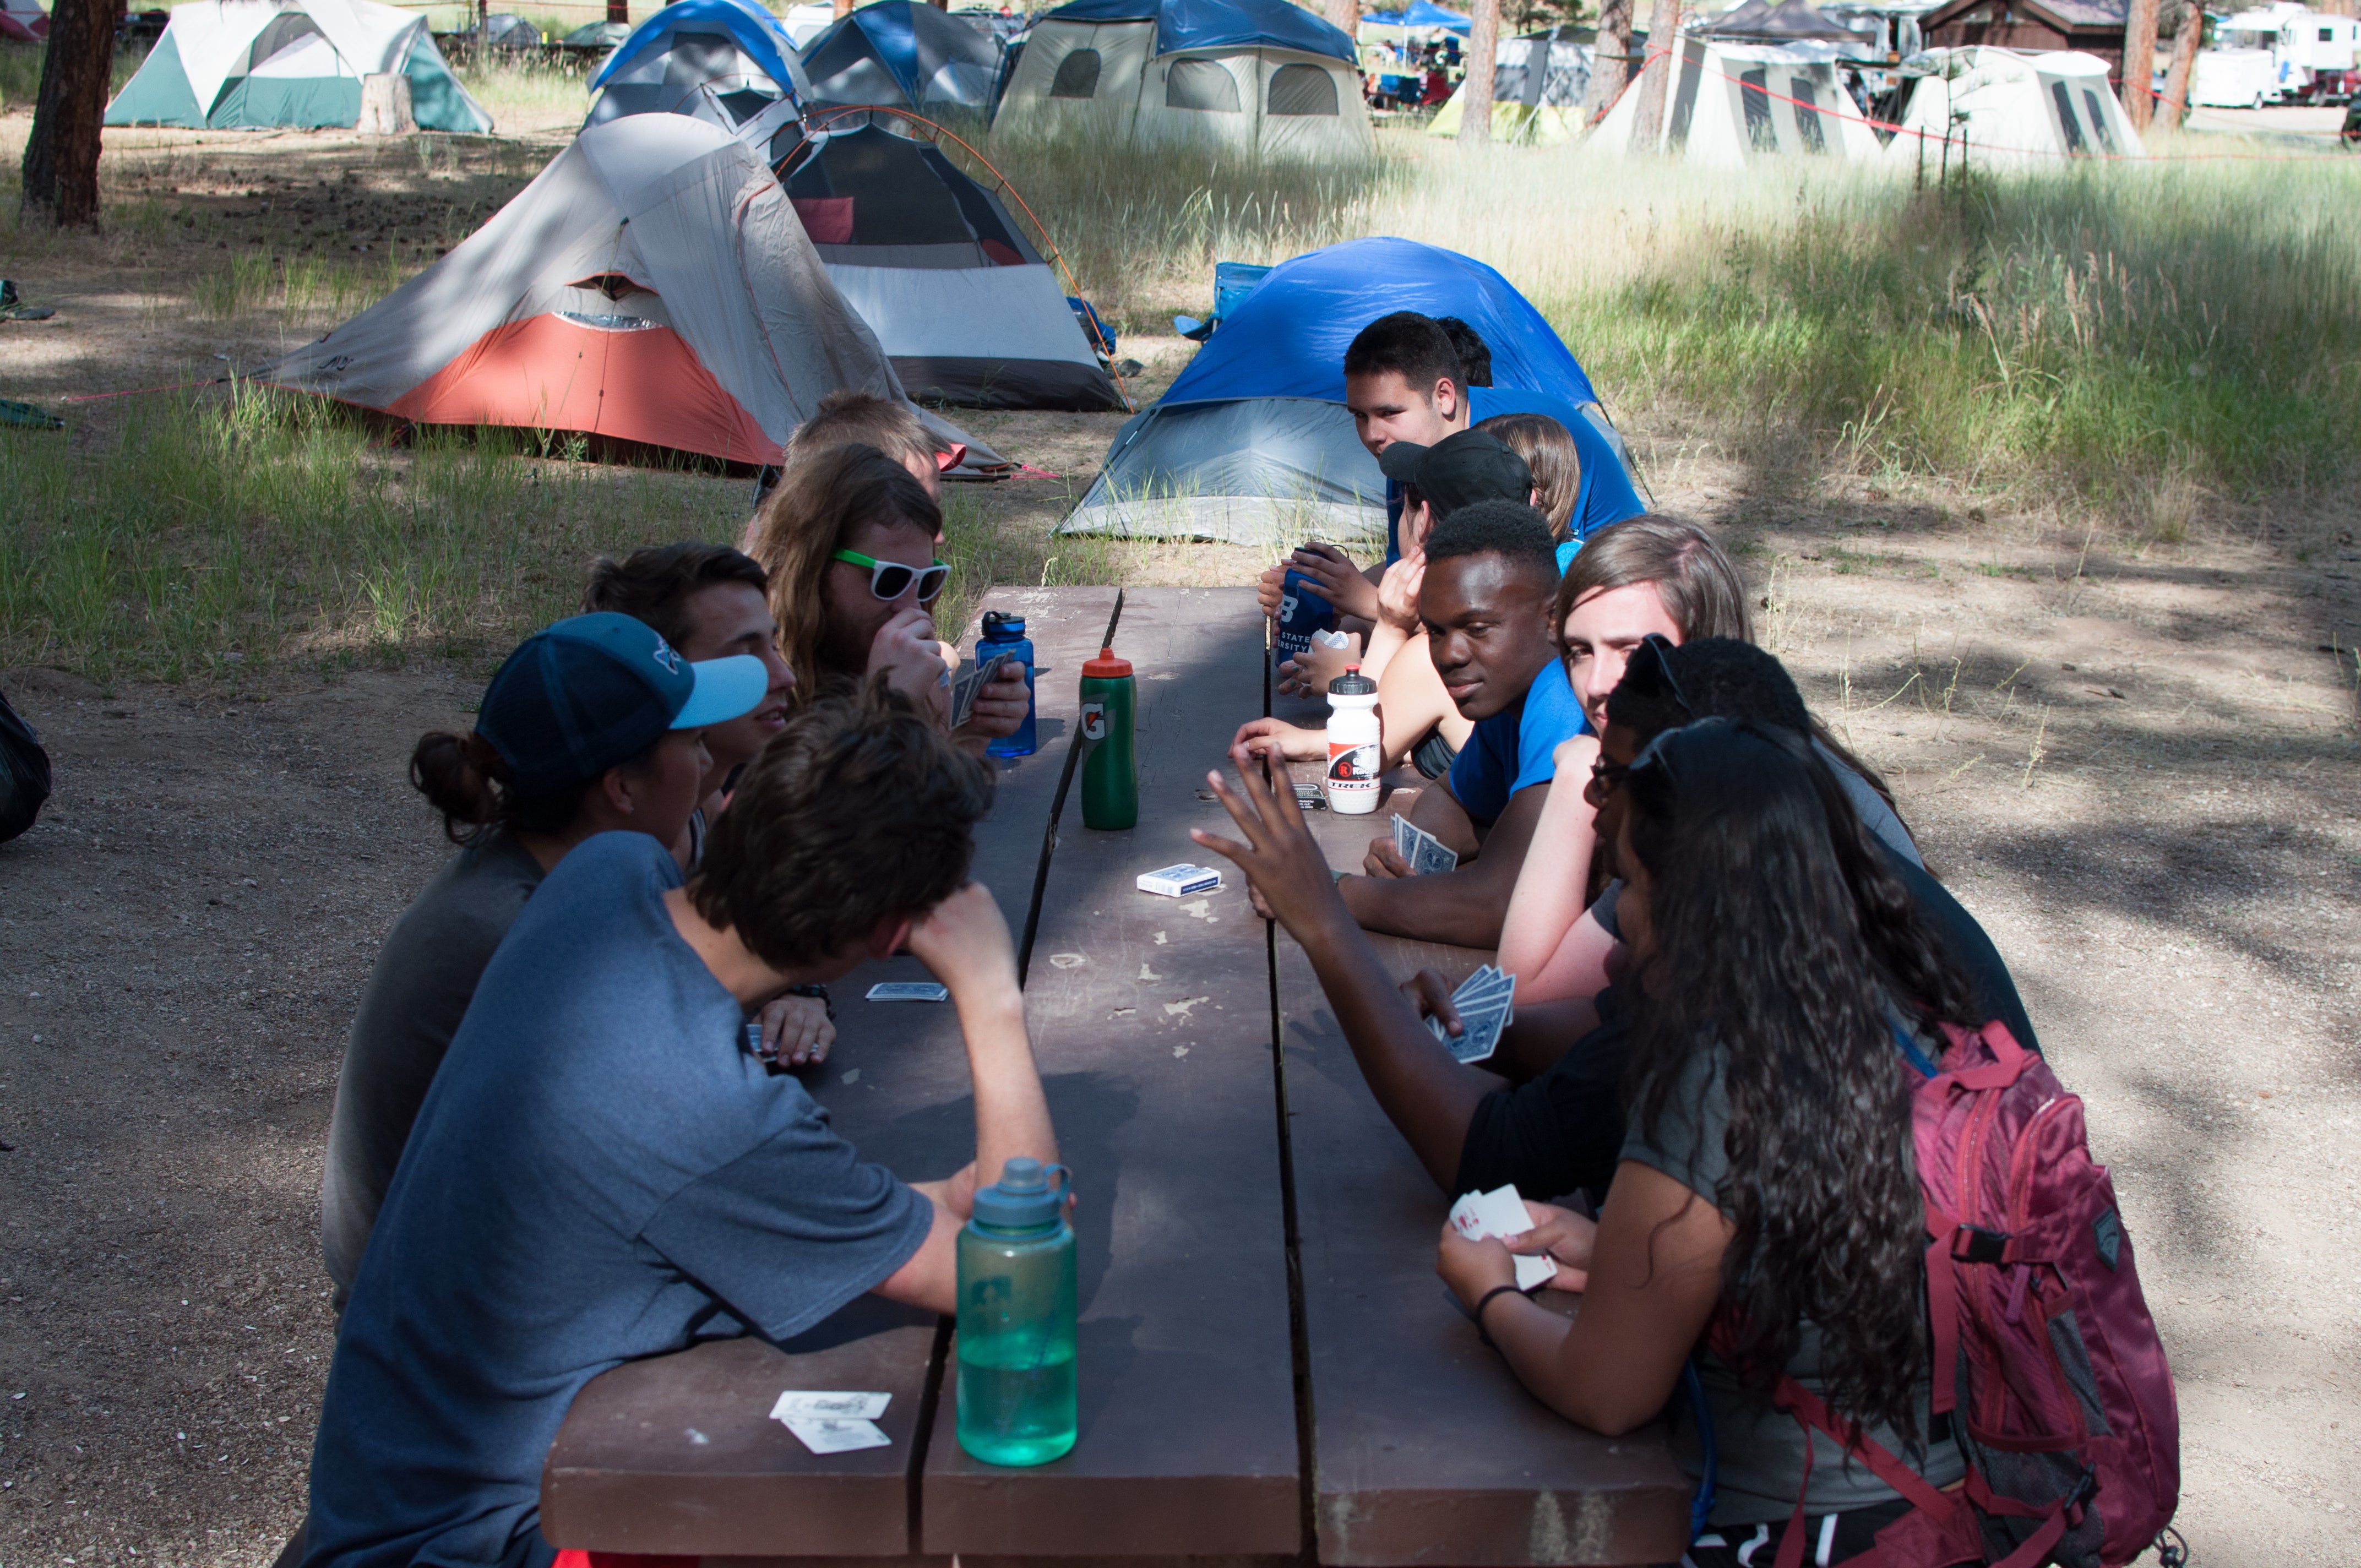 students site at a picnic table at a camp site